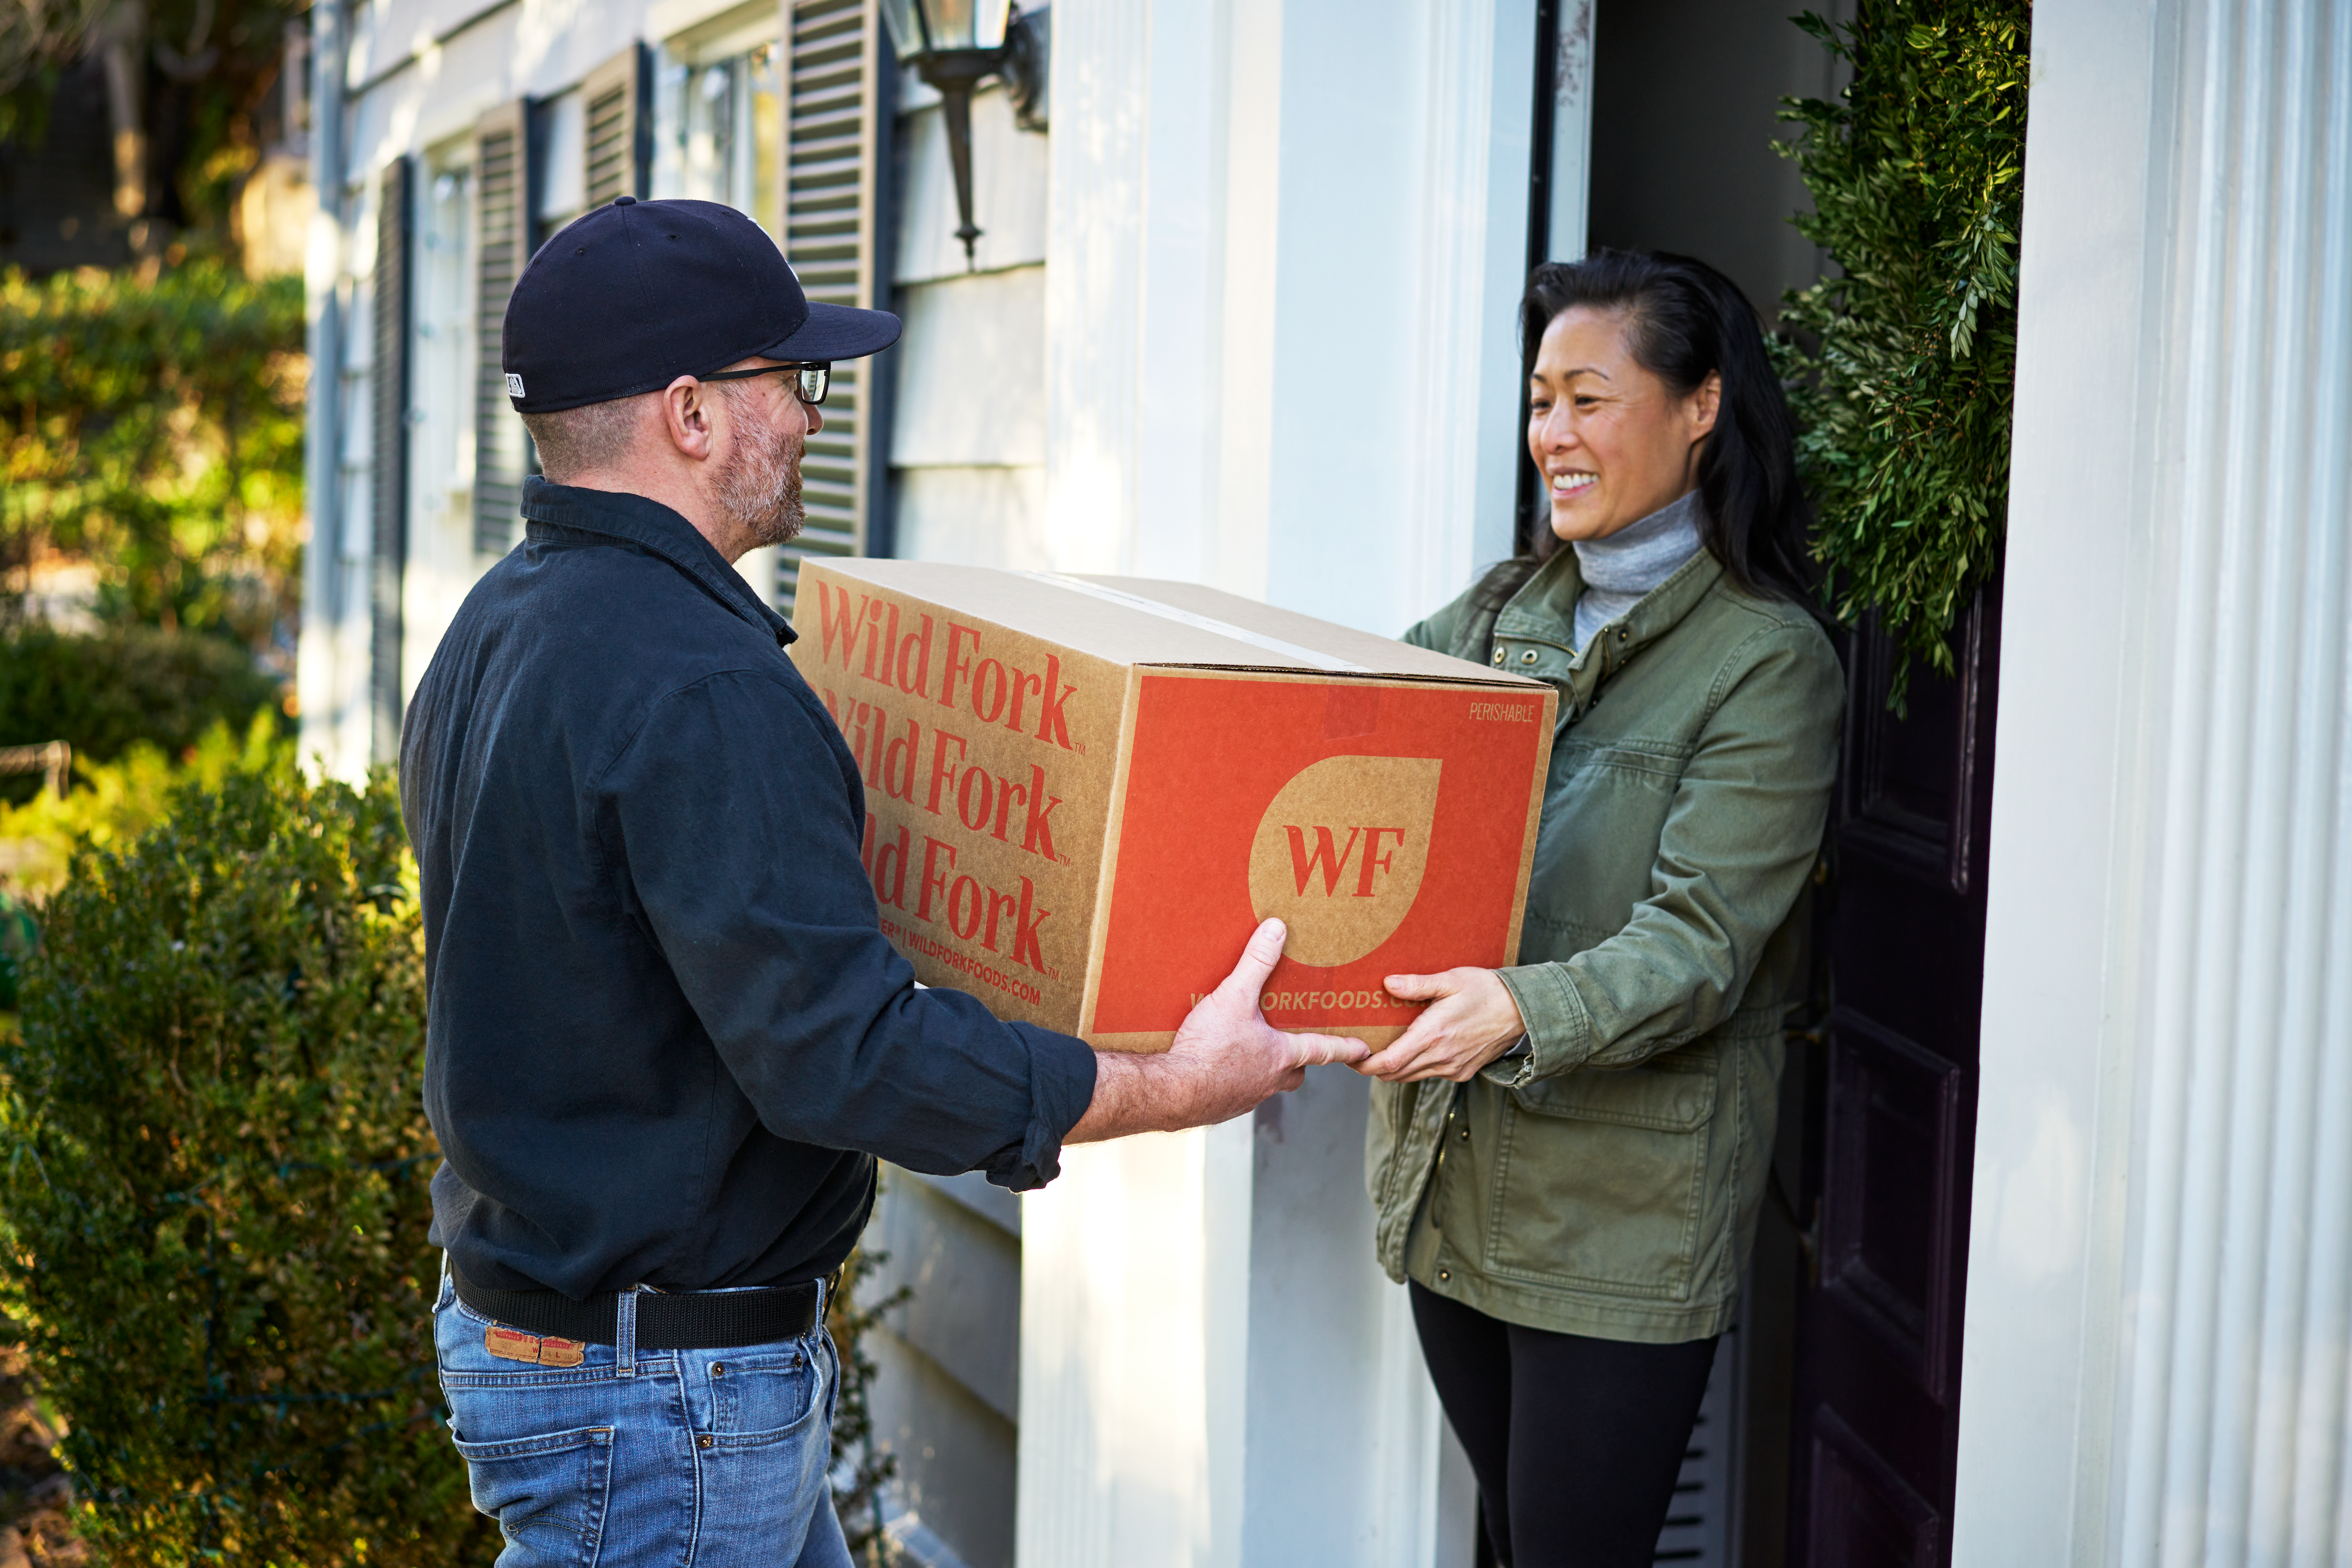 Box Delivery Handoff on Doorstep 7008 px / 4672 px png